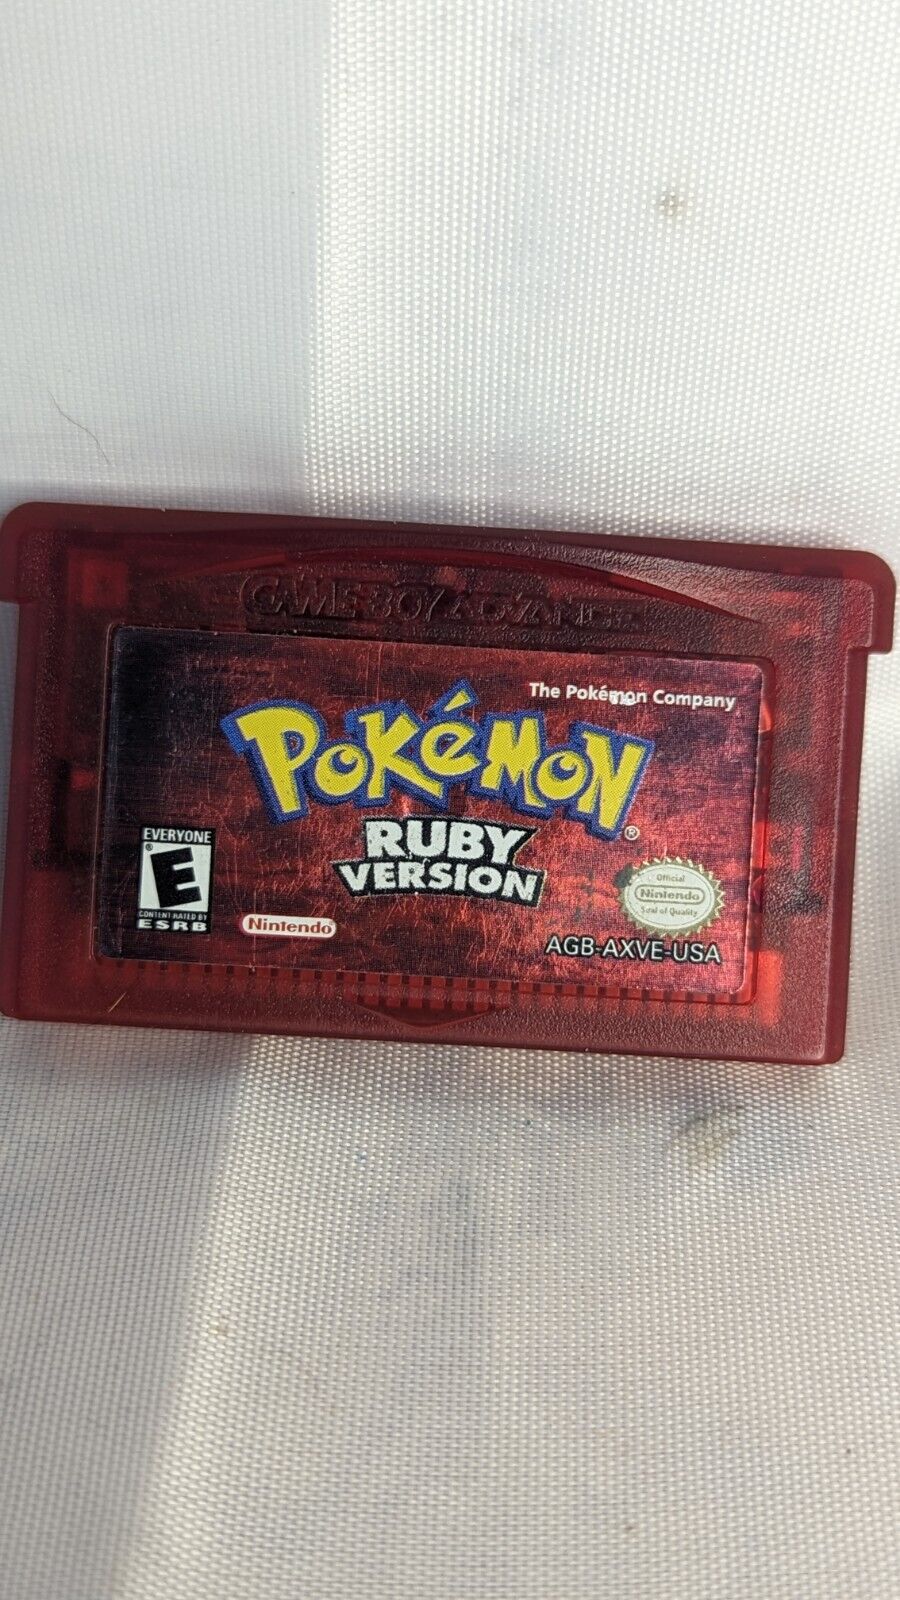 Pokmon: Ruby Version (Game Boy Advance, 2003) Authentic, Game Cartridge Only